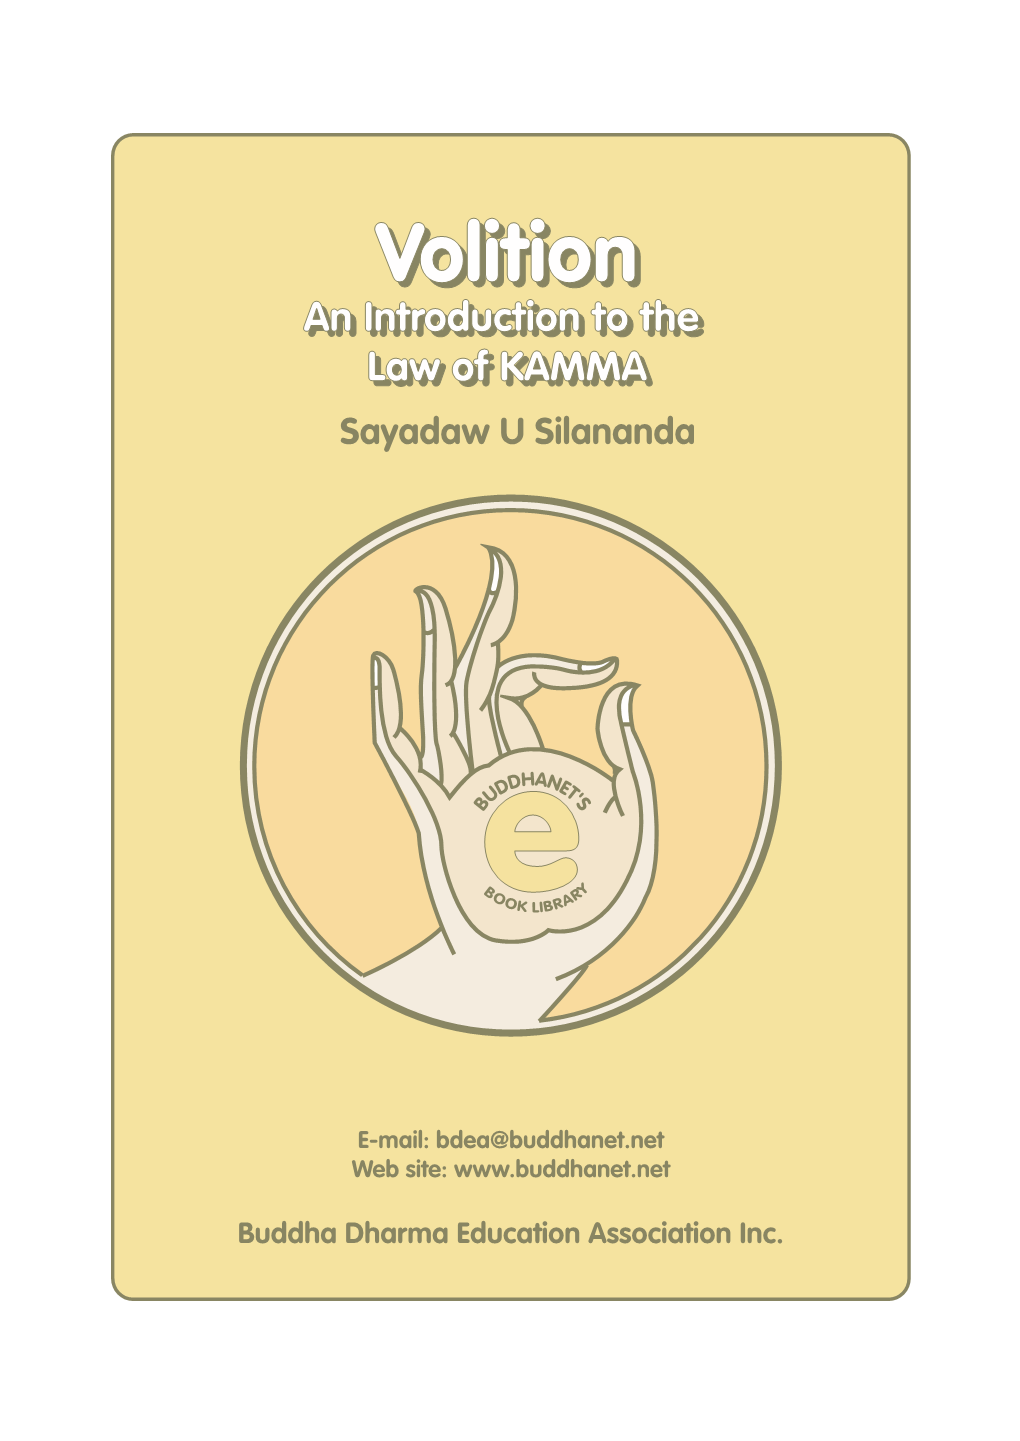 Volition: an Introduction of the Law of Kamma